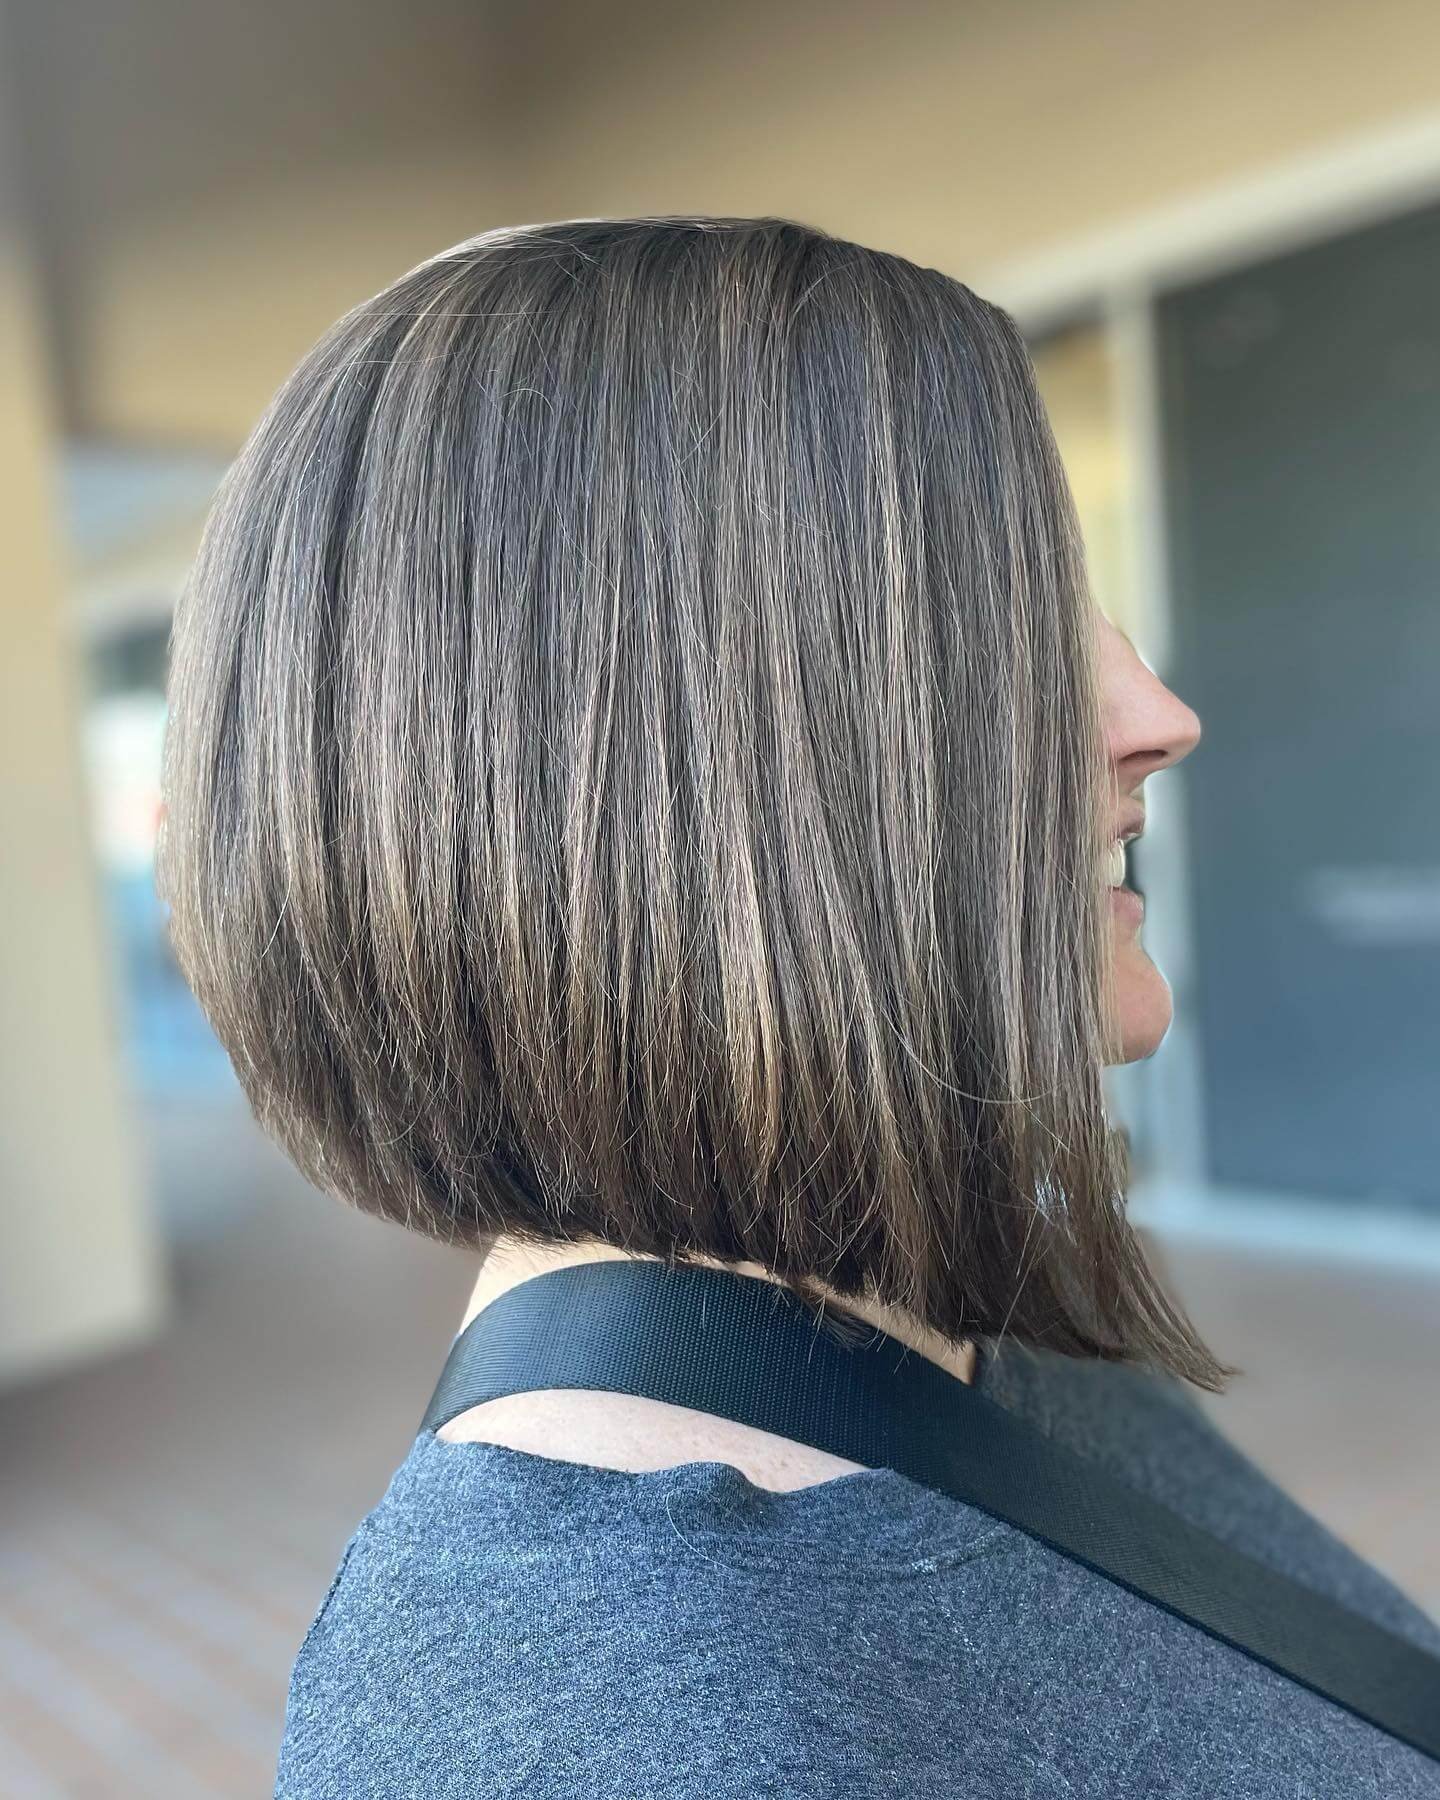 Bold, inverted bob with choppy layers for a dramatic and edgy style